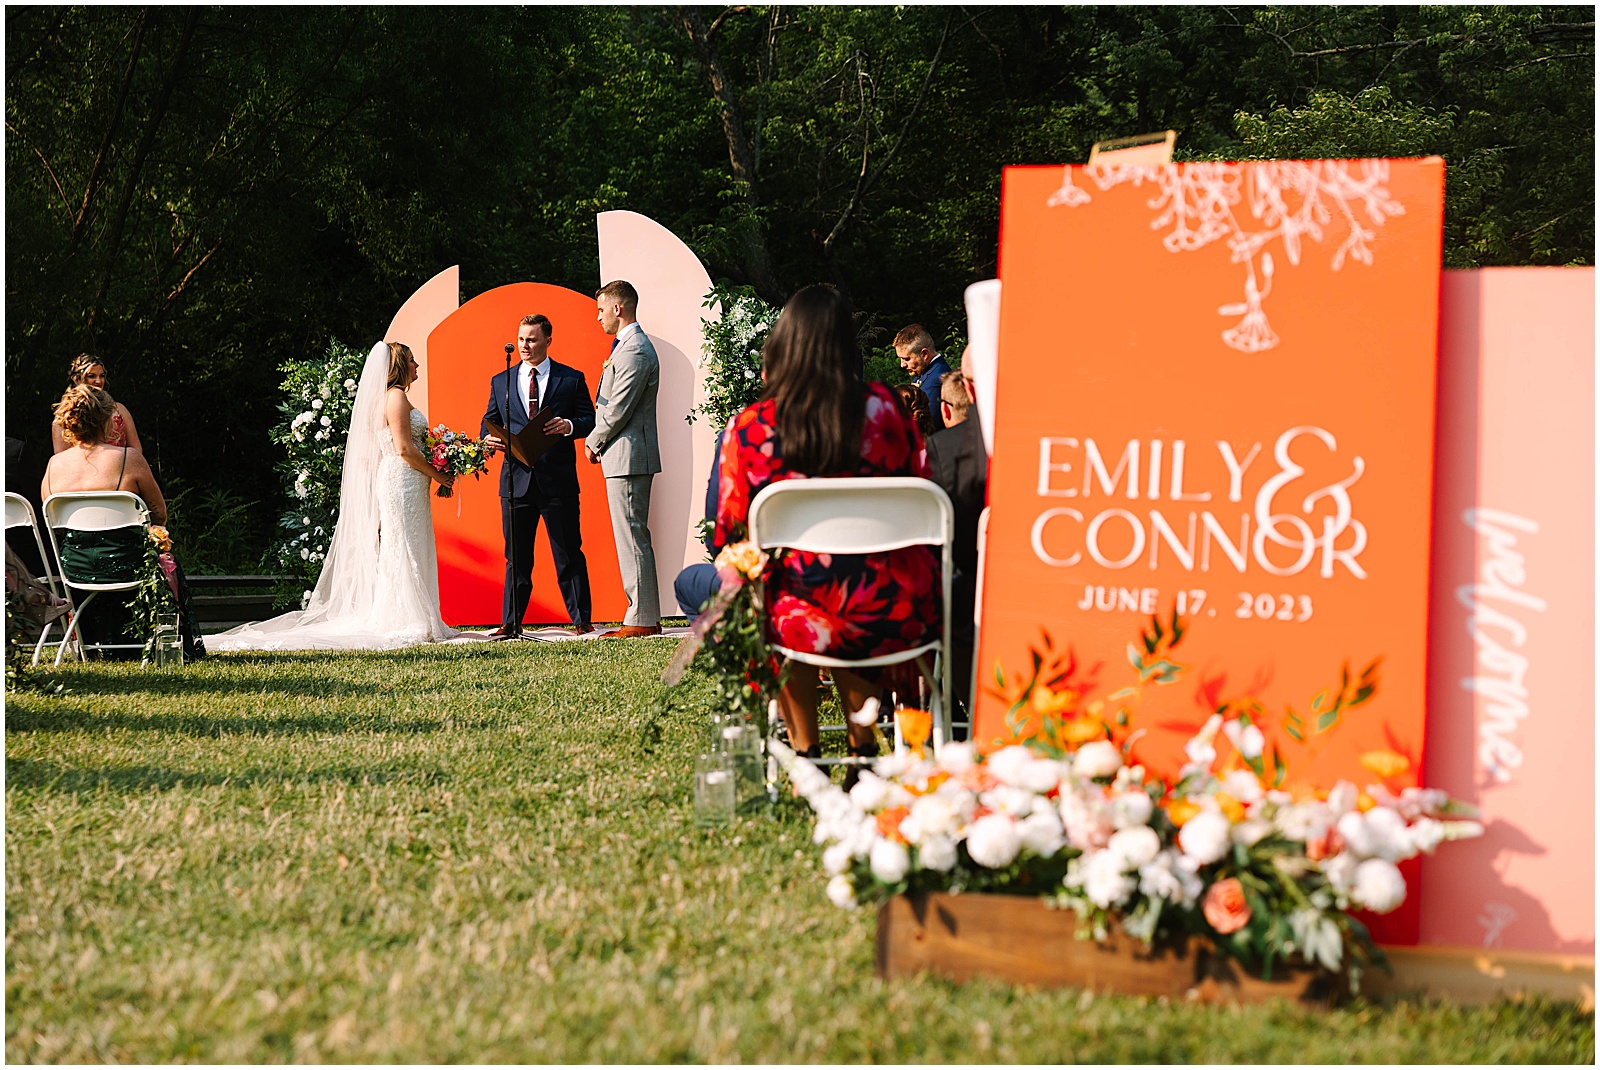 A bride and groom stand in front of an orange and pink wedding ceremony backdrop at a Philander Chase Knox Estate wedding.